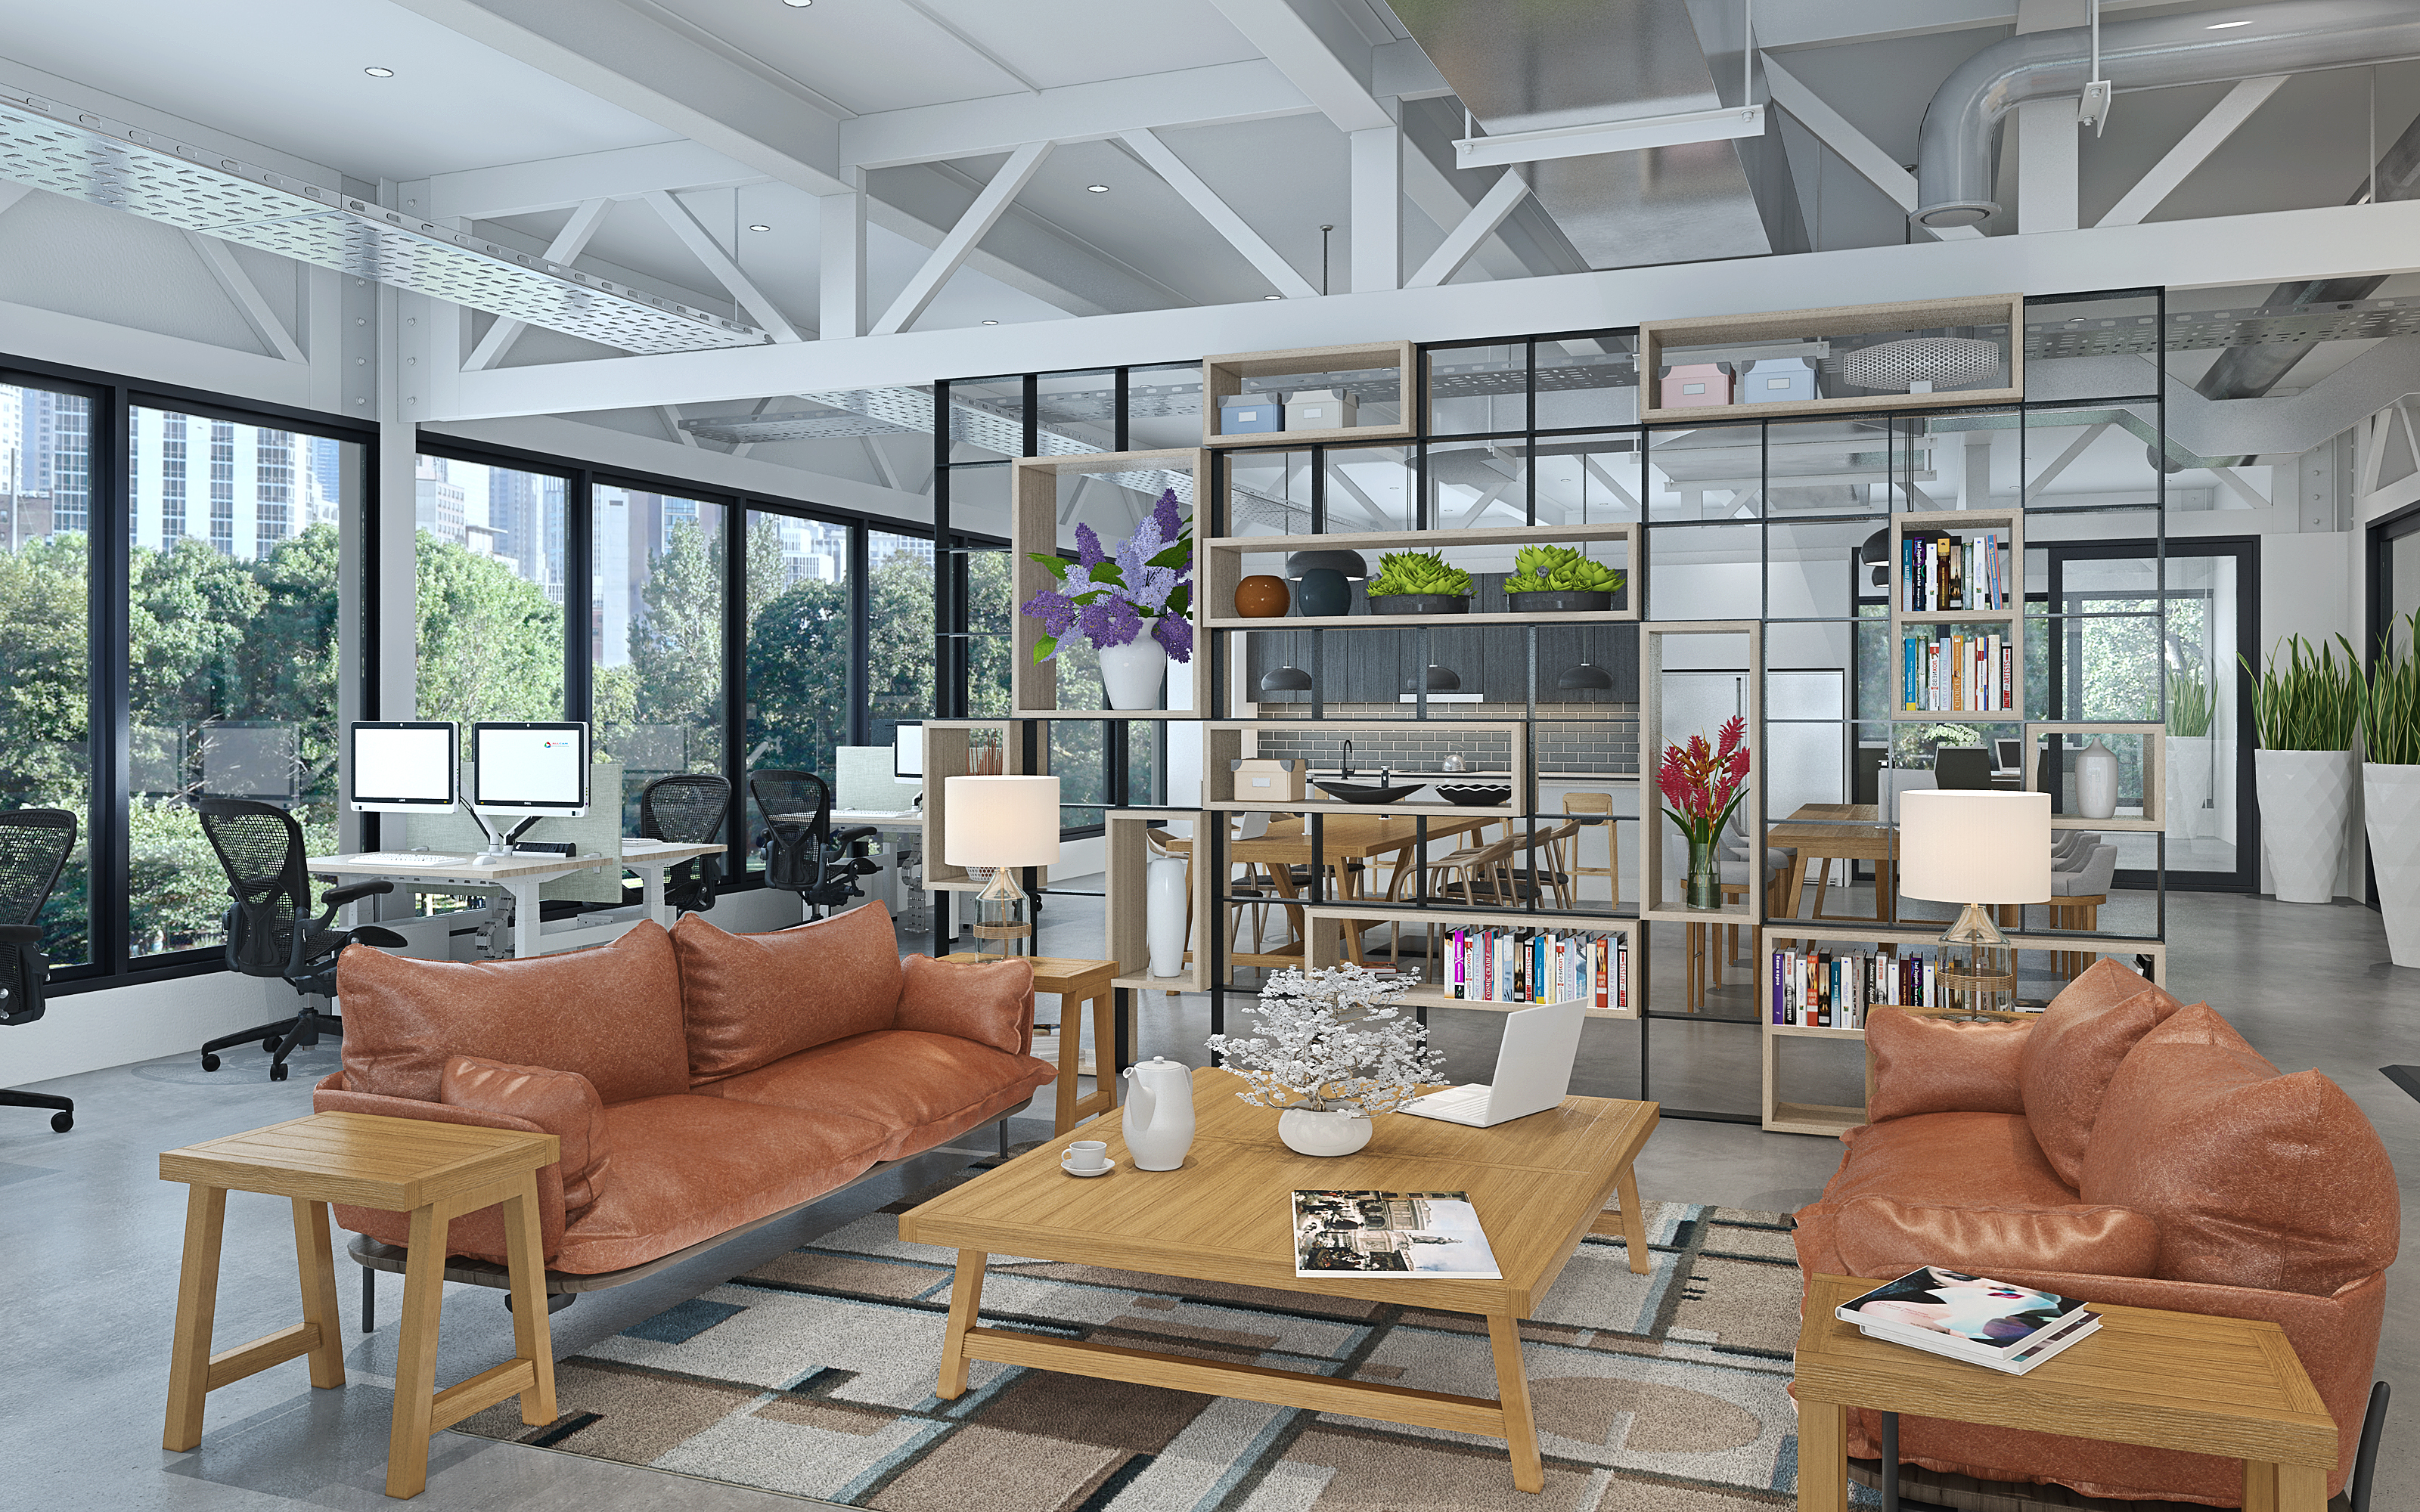 For your eyes only, INTERIOR in 3d max vray 3.0 image